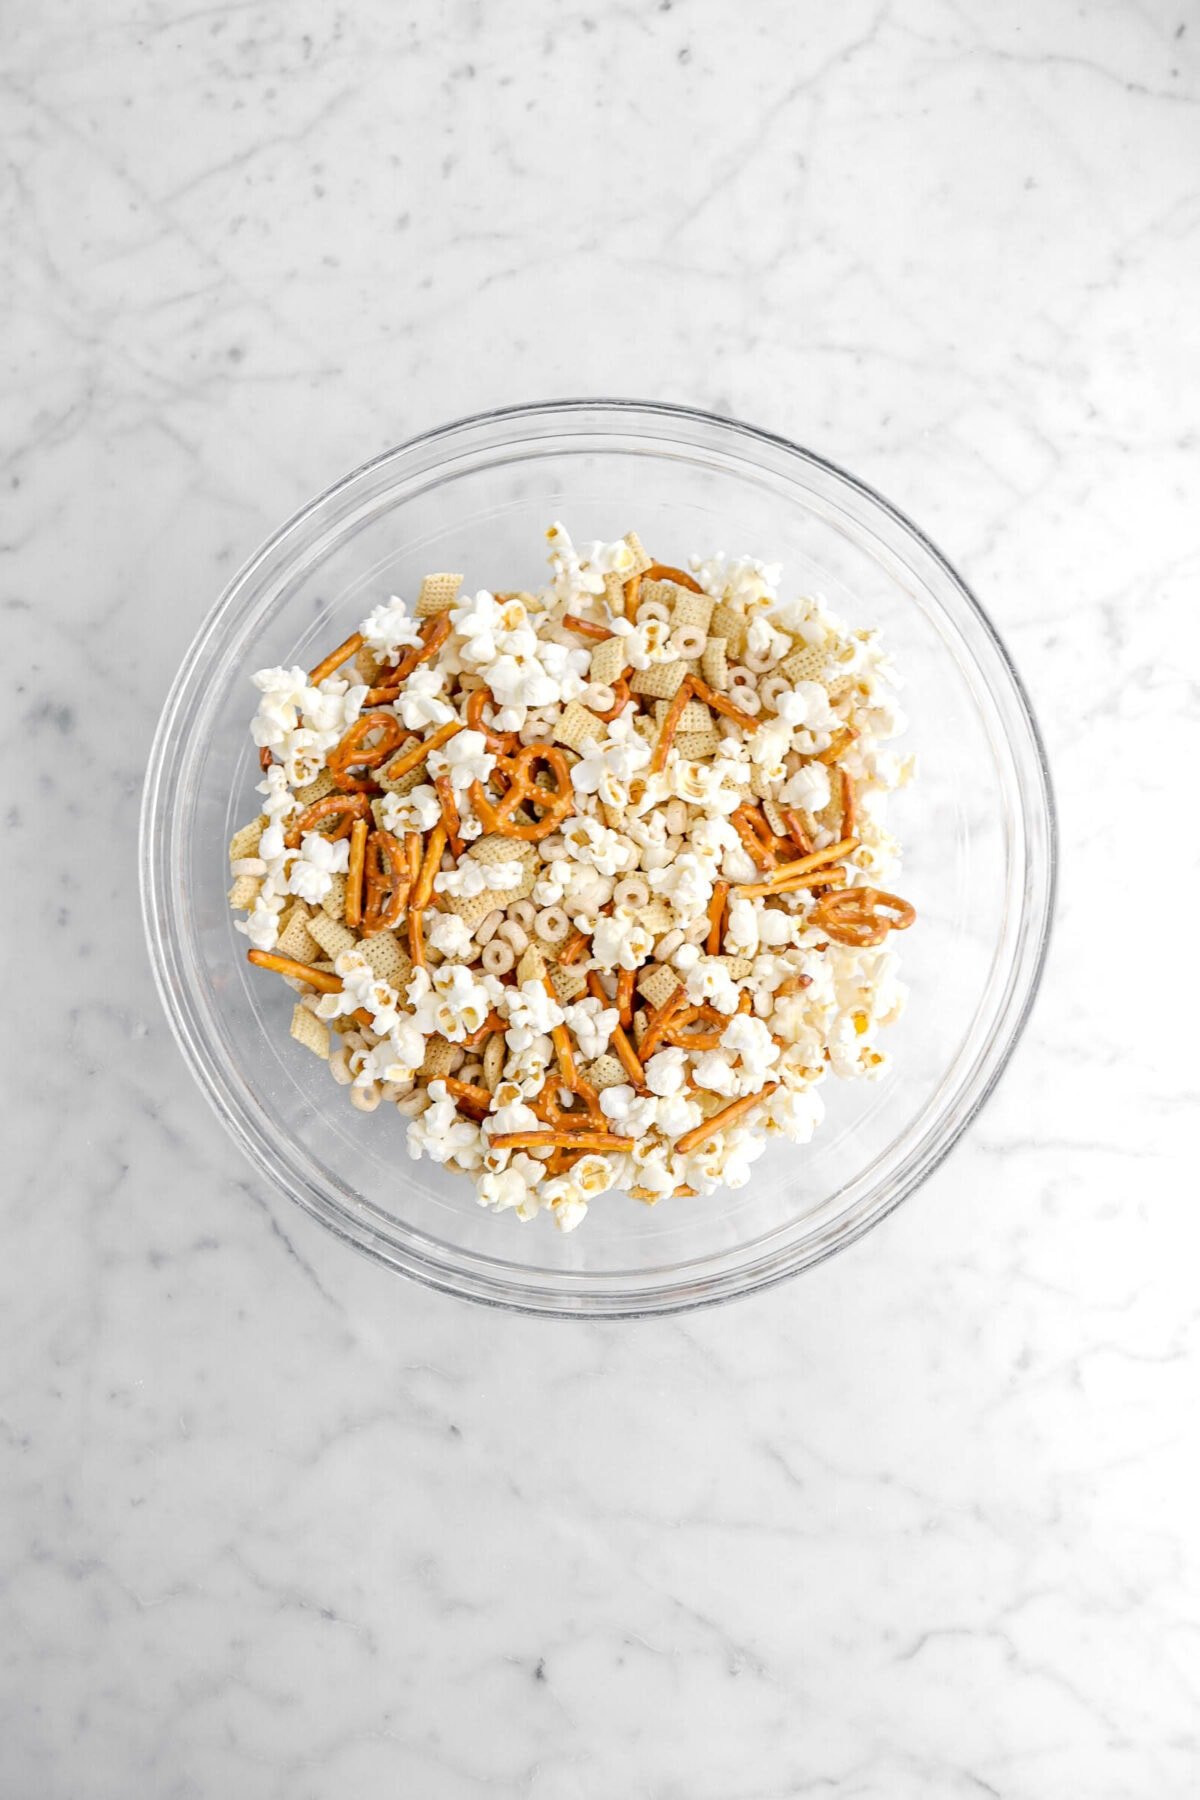 popcorn, pretzels, chex, cheerios, and peanuts mixed together in glass bowl.